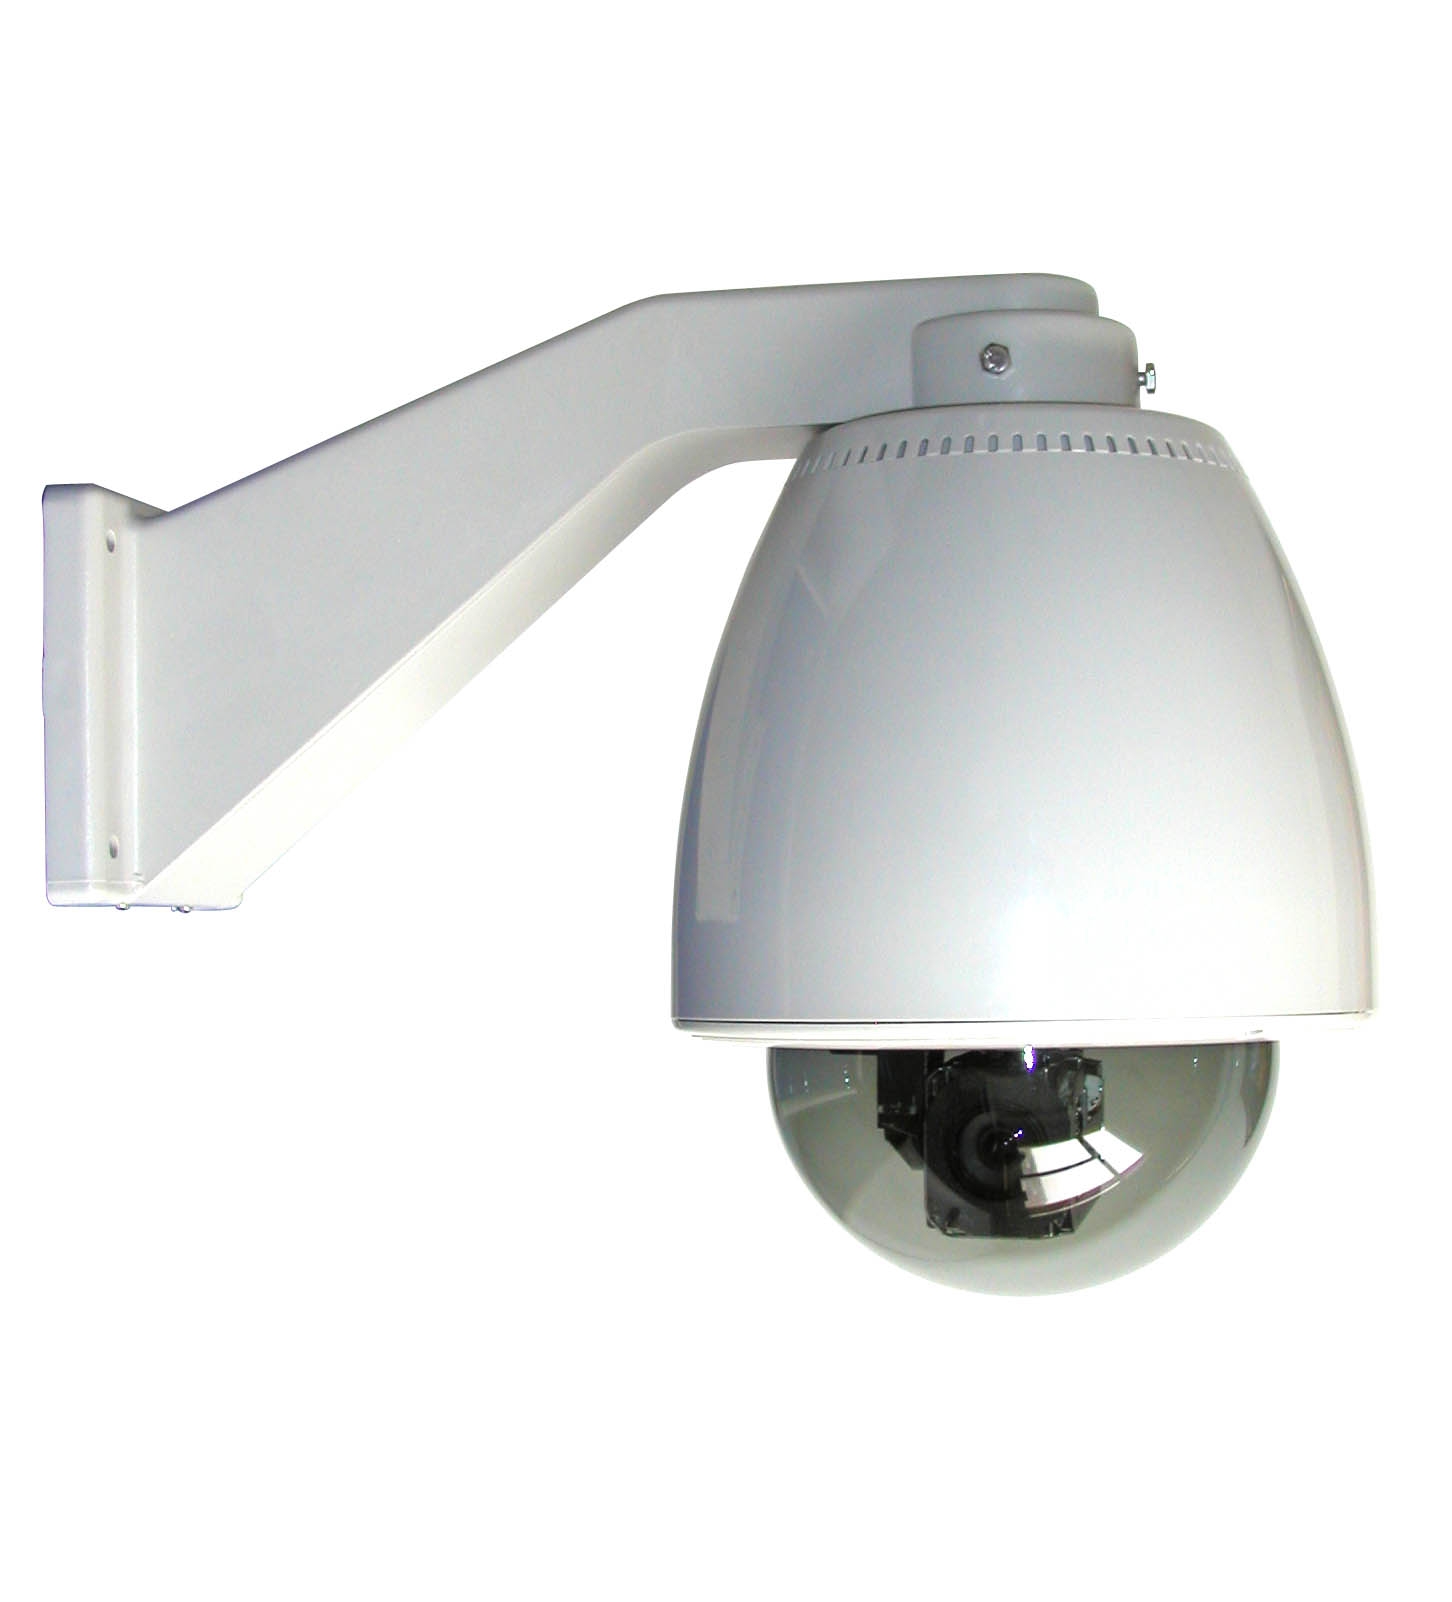 IP-PTZW Weatherproof IP Color High Resolution PTZ Camera with Wall Mount Bracket